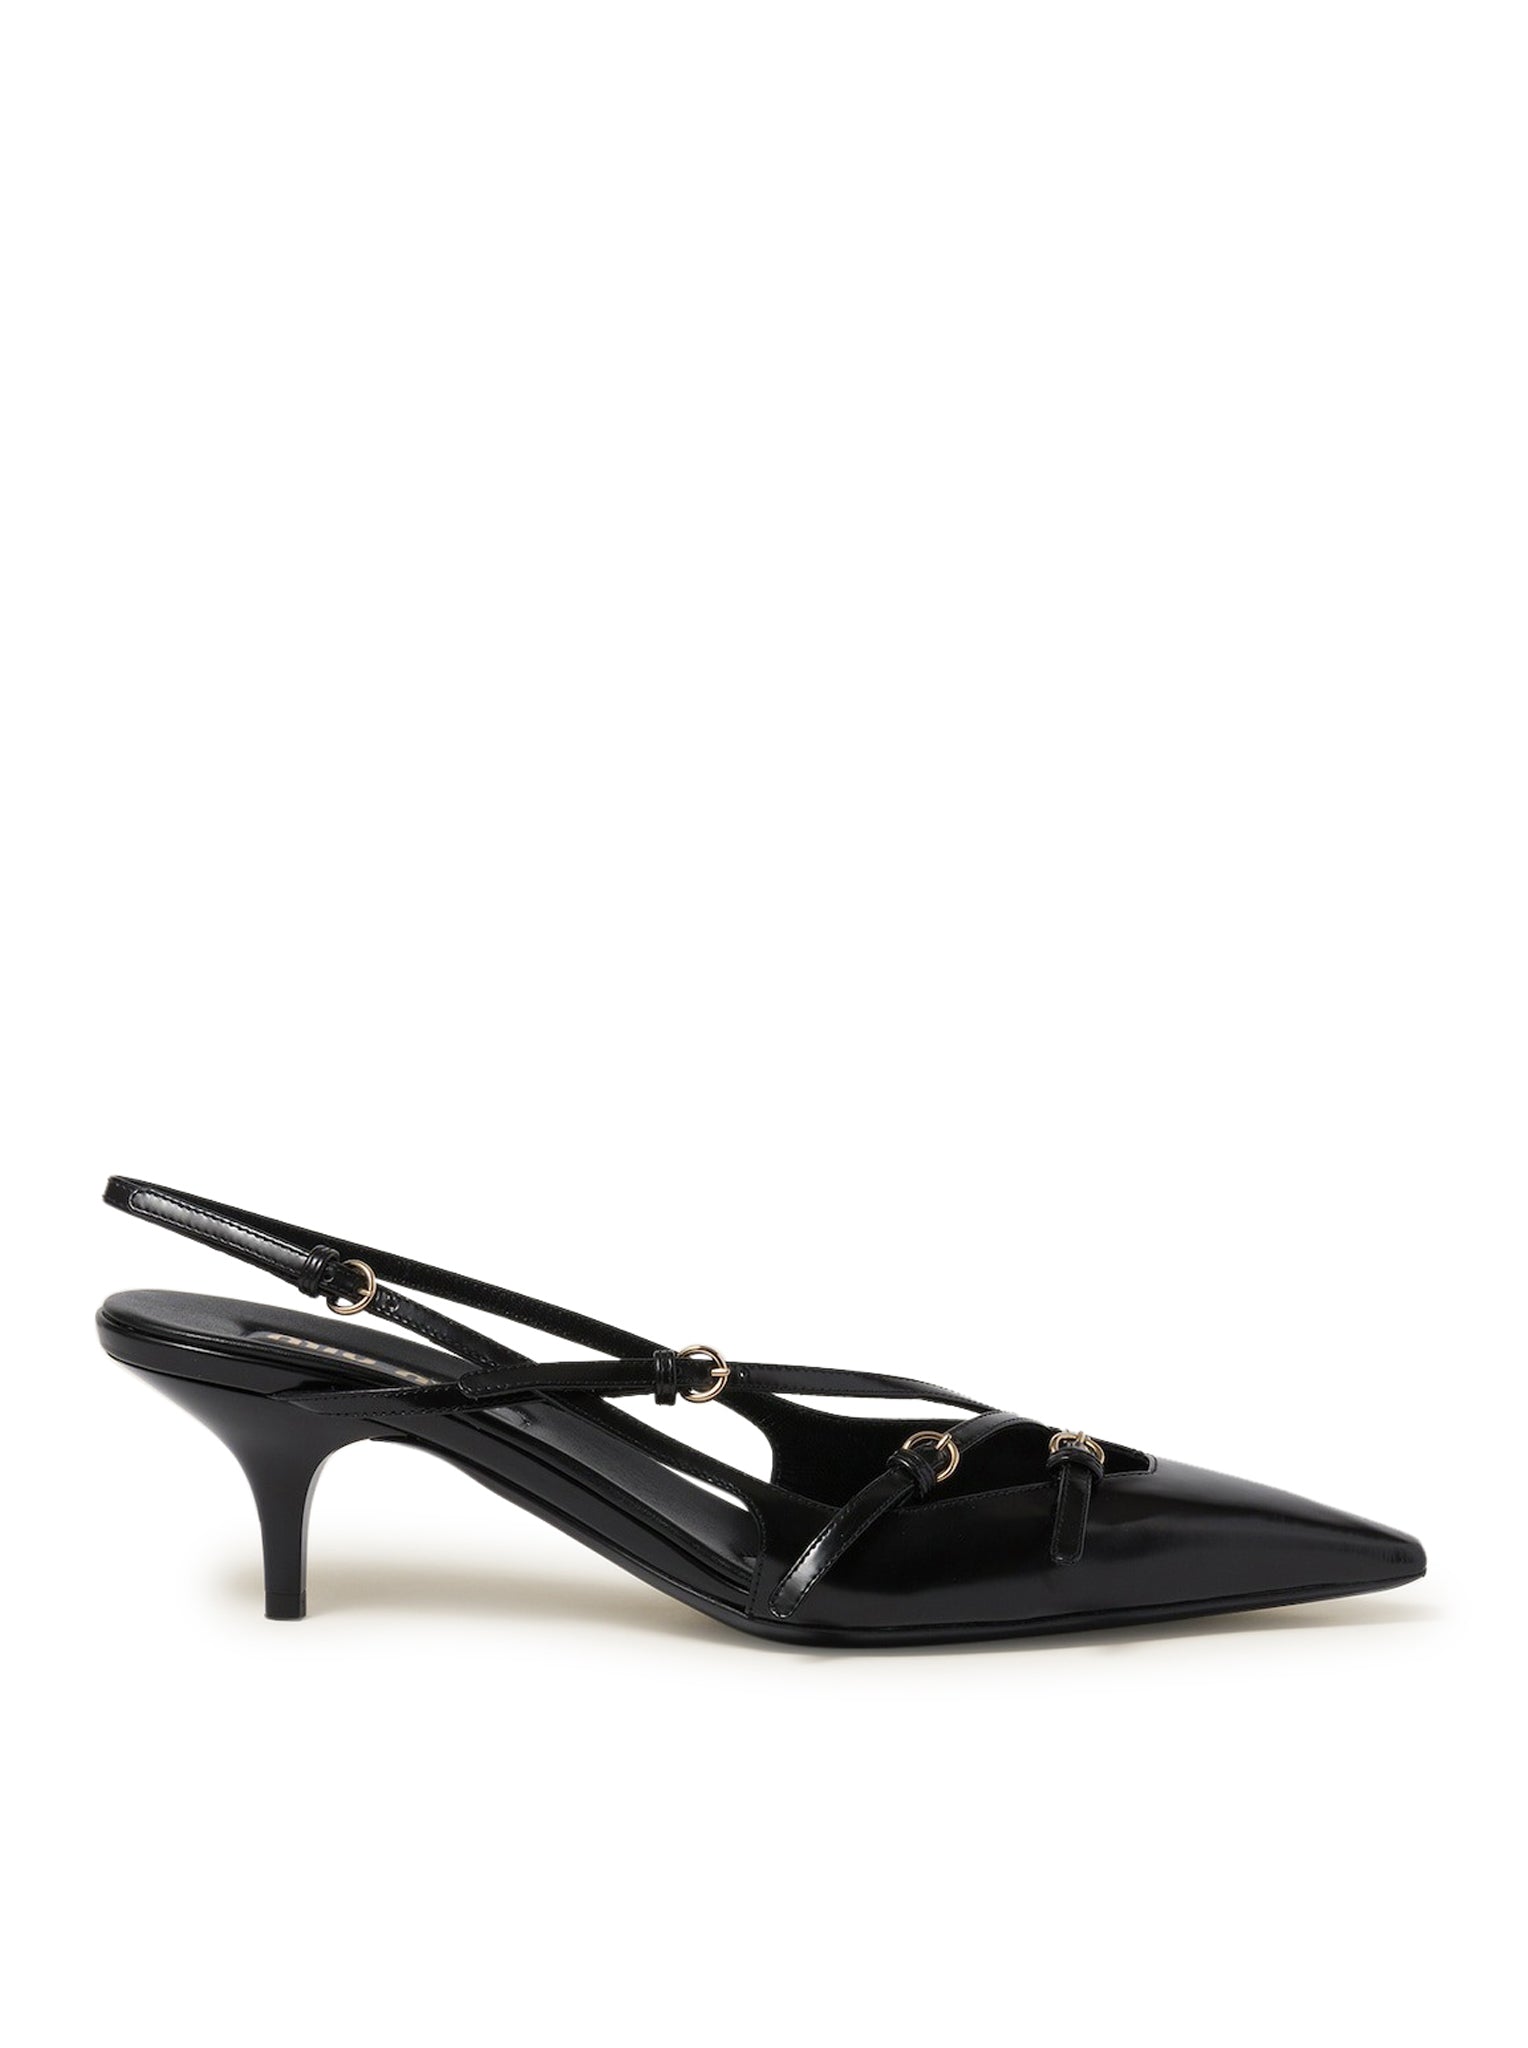 Brushed leather slingback pumps with buckles